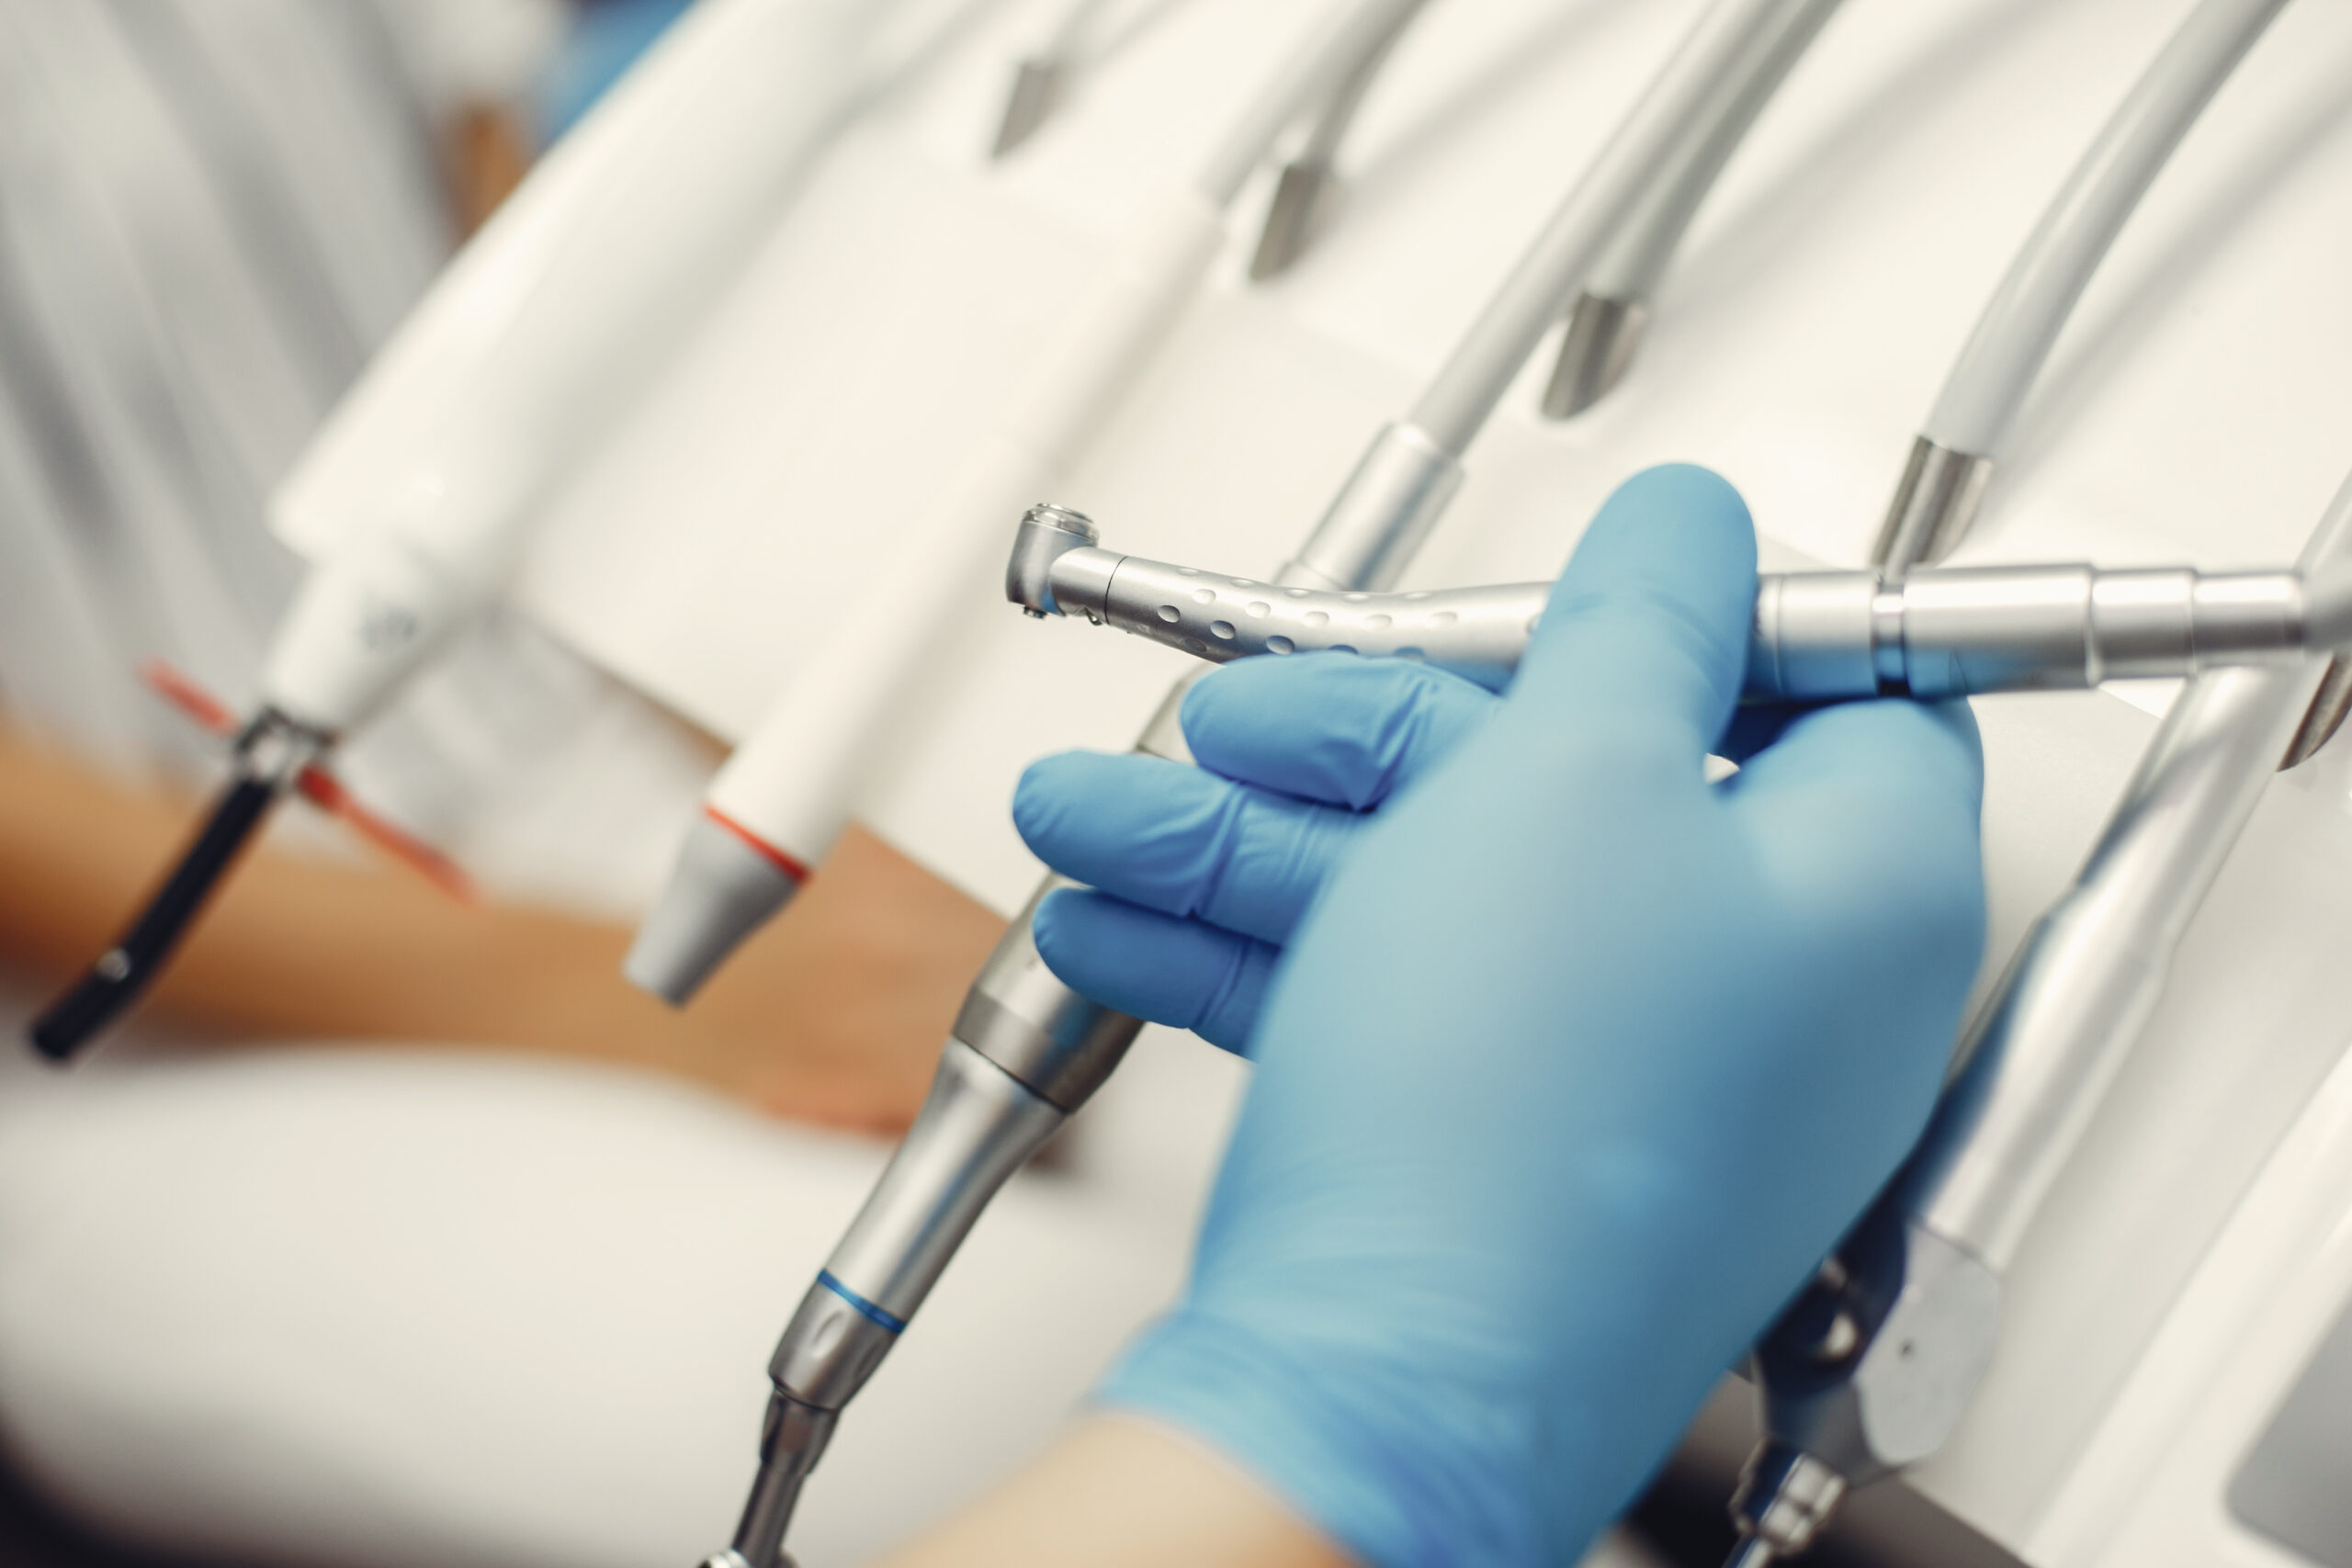 Metal instruments for the treatment of teeth. Dental clinic. Hands in a blue gloves